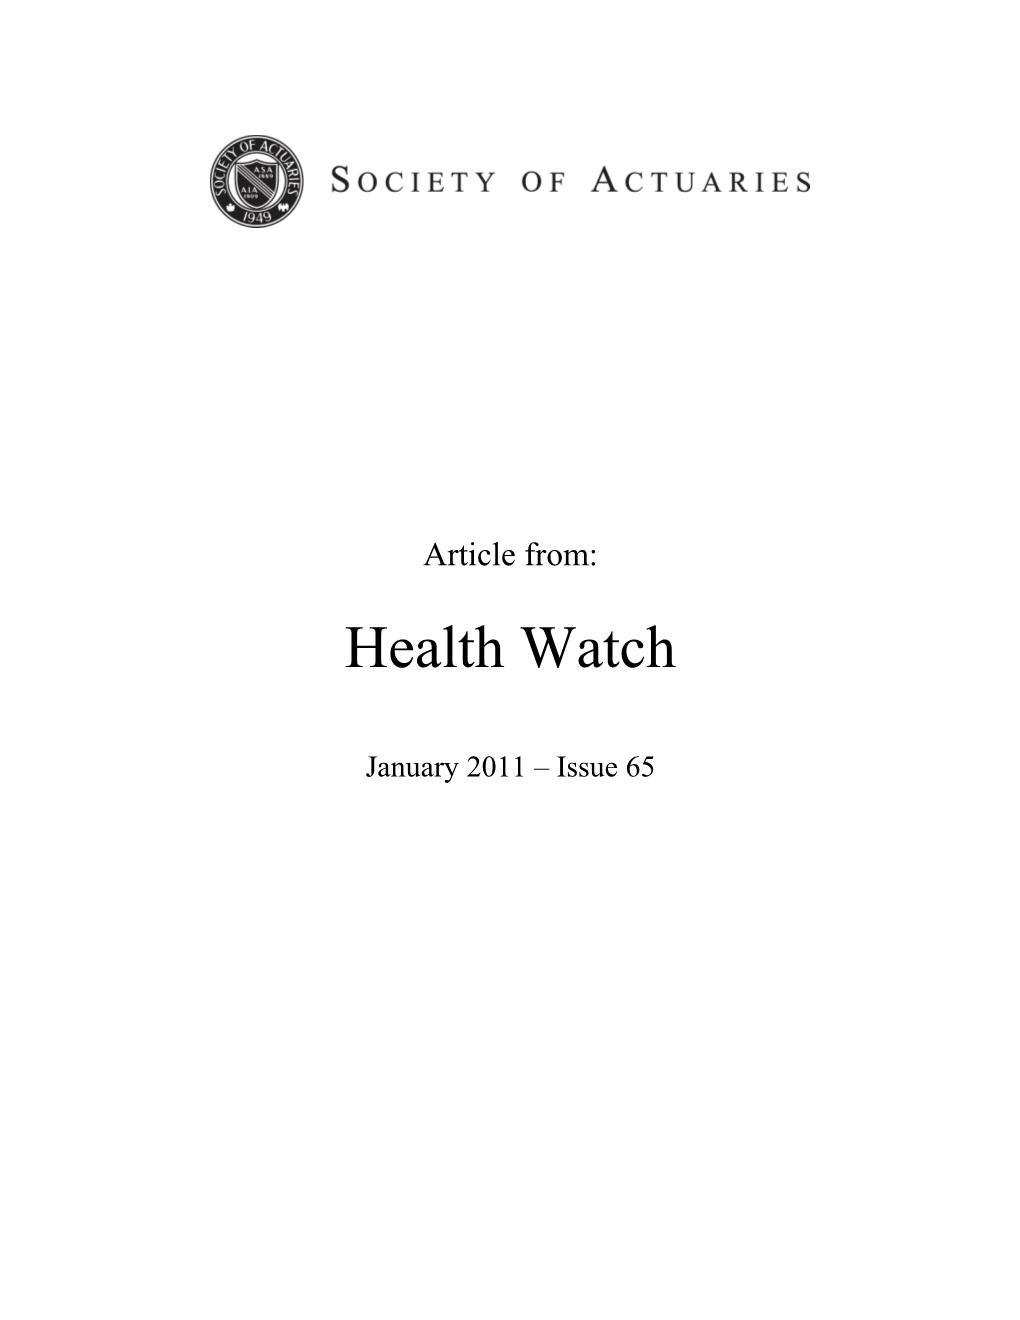 Soundbites from the American Academy of Actuaries' Health